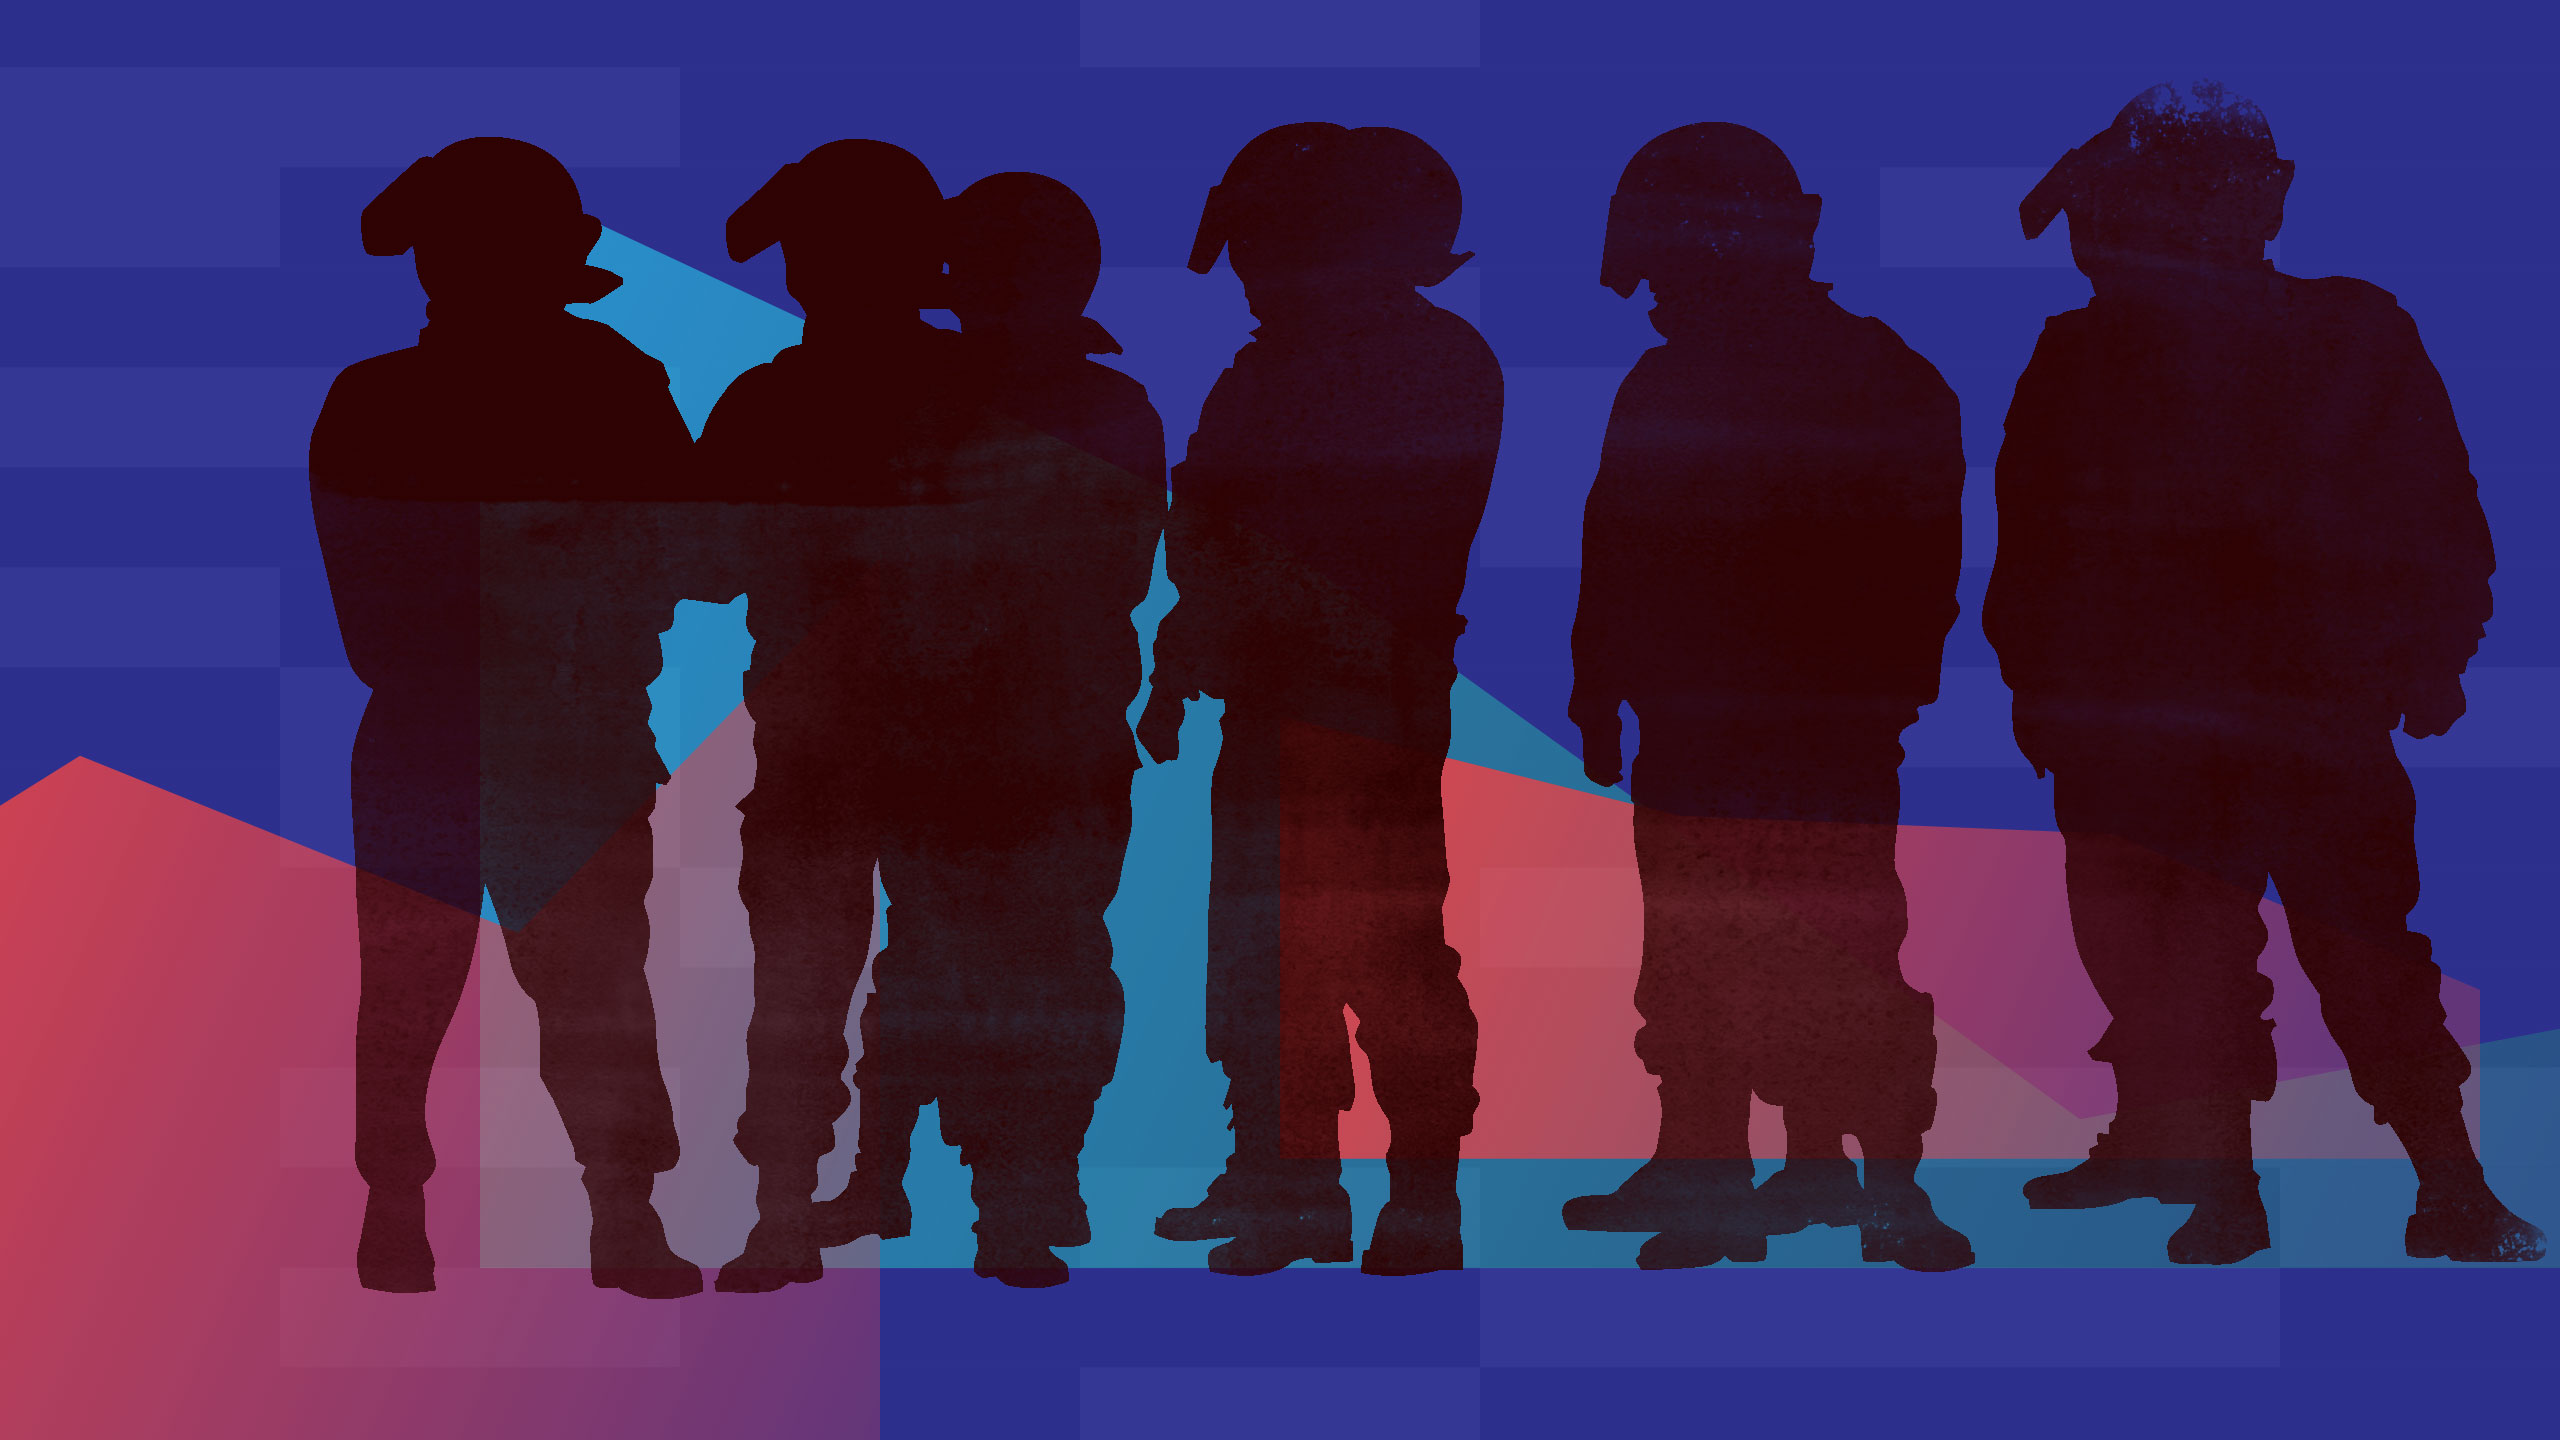 Illustration showing silhouettes of police over an abstract background.